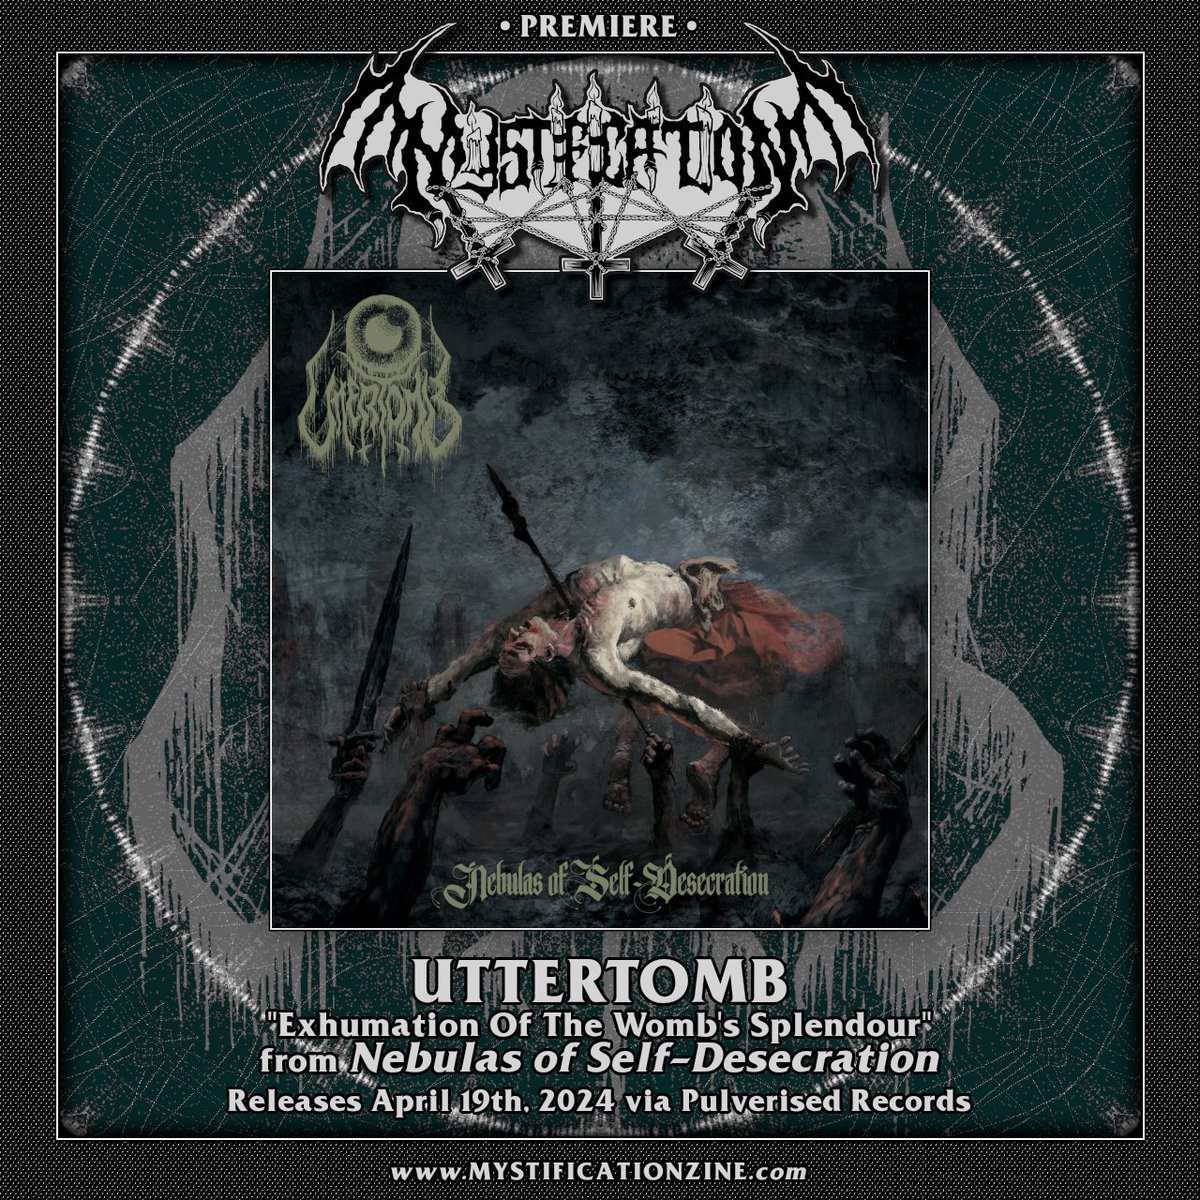 An Early Stream of “Exhumation of the Womb’s Splendour” from UTTERTOMB ‘Nebulas of Self-Desecration’ LP (2024) | PREMIERE

Check out 'Exhumation of the Womb's Splendour' from Uttertomb's LP 'Nebulas of Self-Desecration' April 19th via Pulverised Records.

mystificationzine.com/2024/01/24/an-…